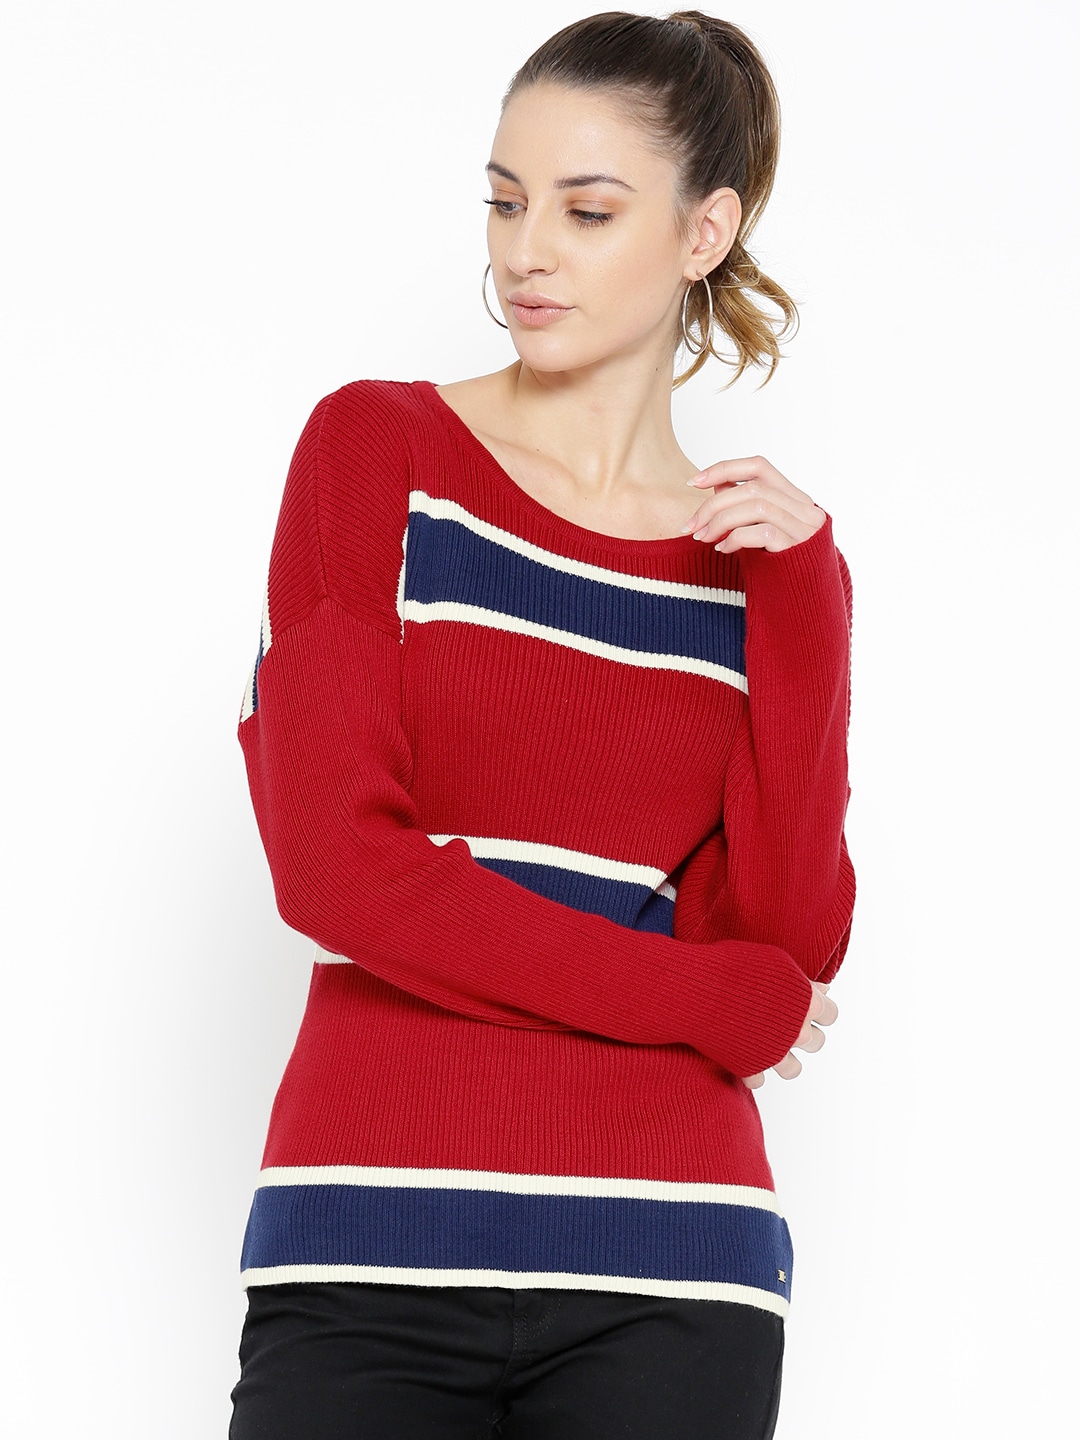 U.S. Polo Assn. Women Red & Navy Blue Striped Sweater Price in India